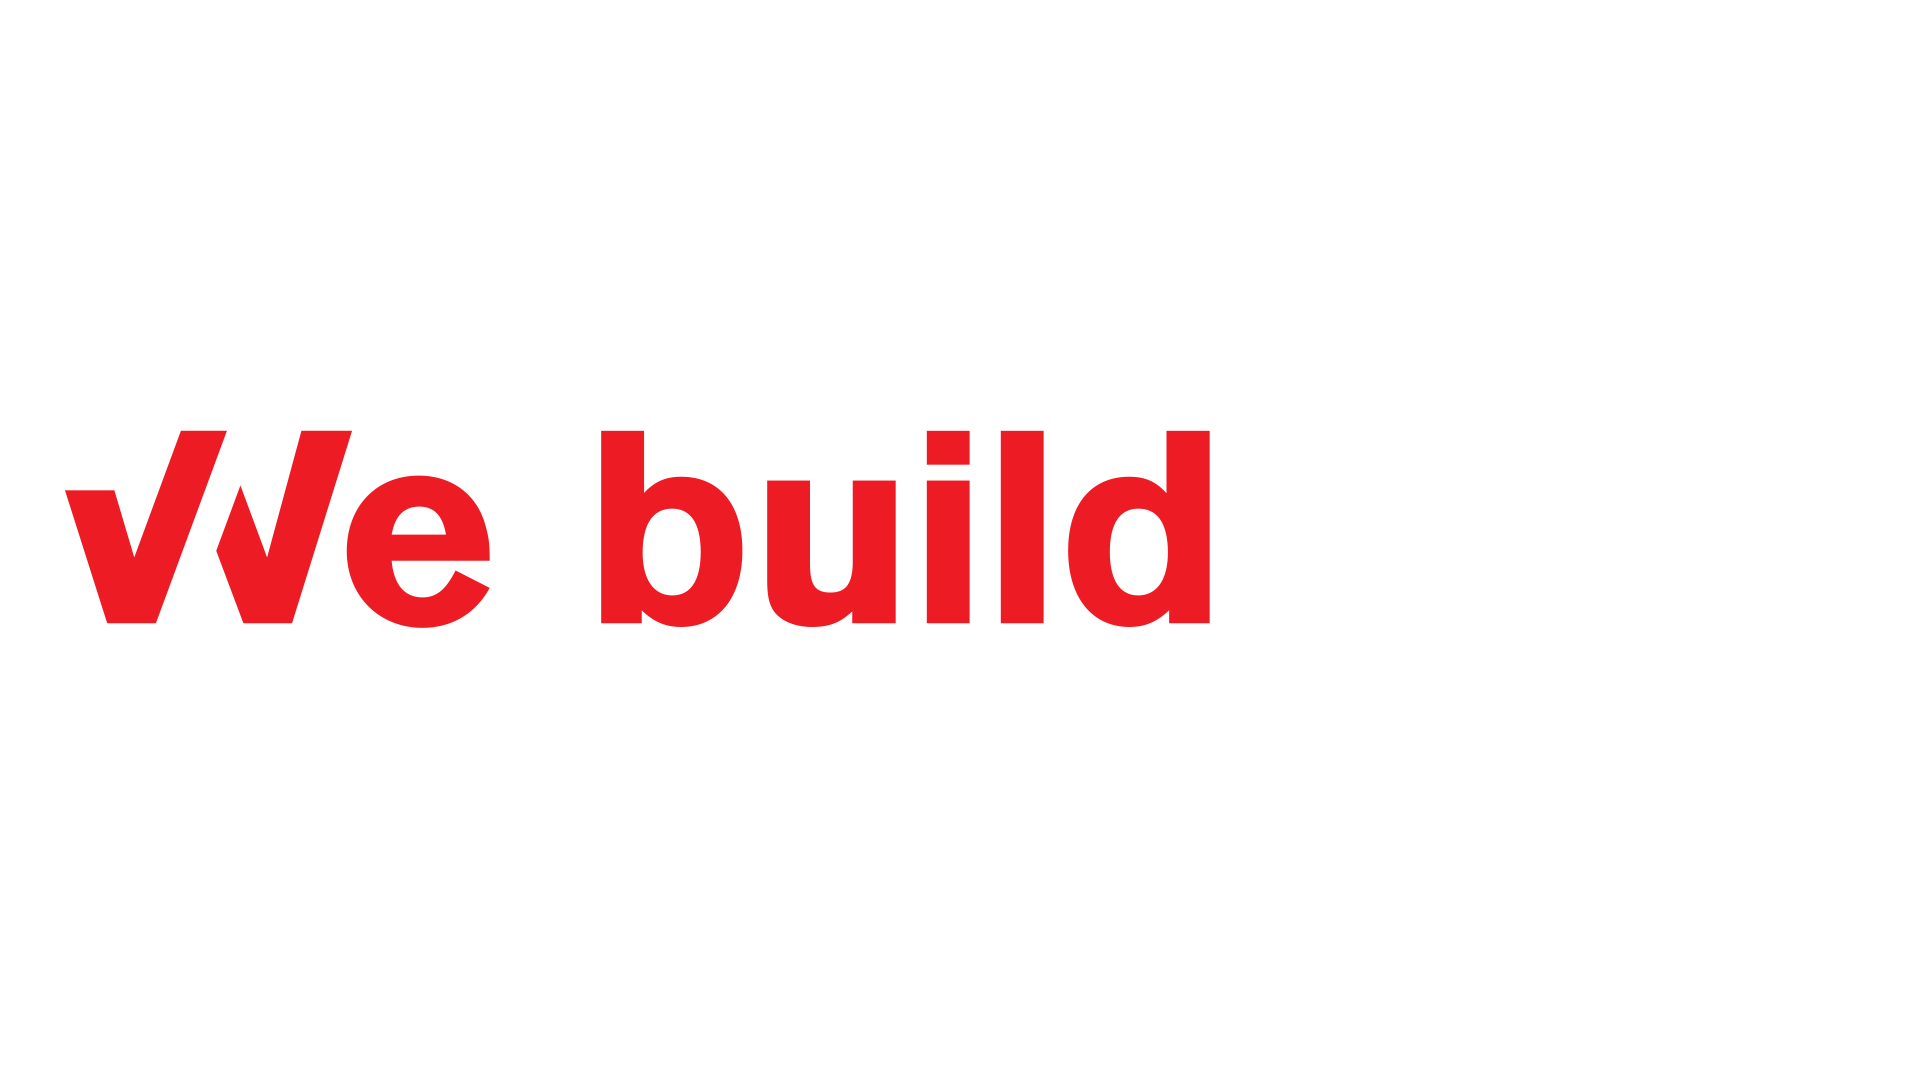 Typography animation of the corporate identity statement saying: "We build, we work, we construct, we concrete."